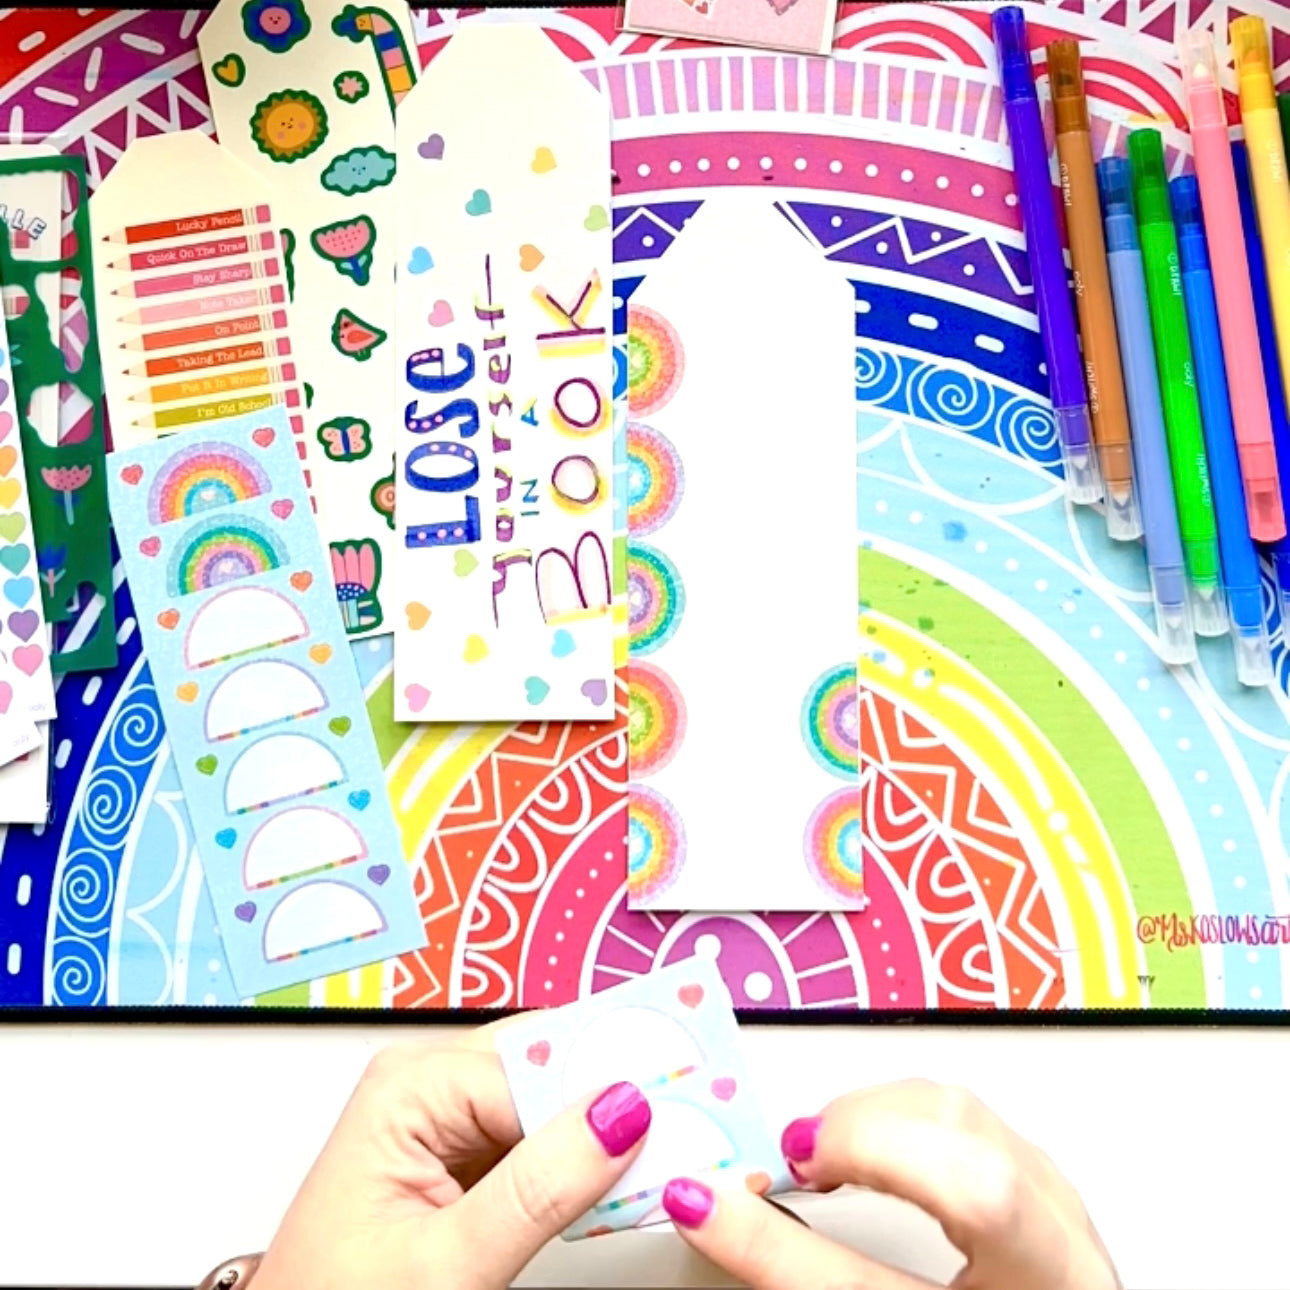 Adding colorful stickers to DIY bookmarks